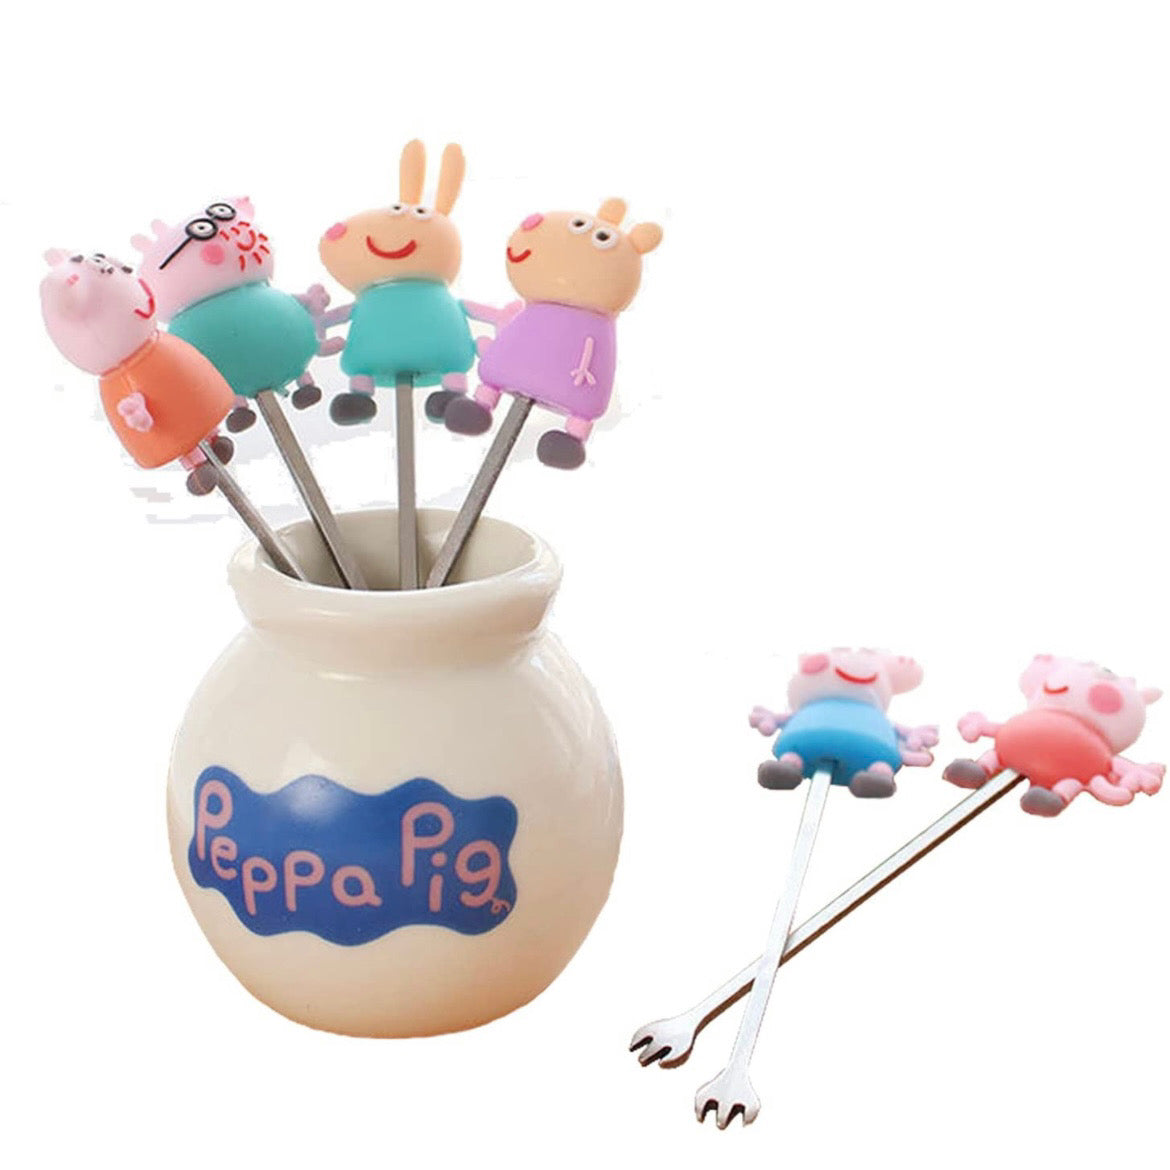 UPD Peppa Pig Acrylic 9x8 Inch Meal Holder